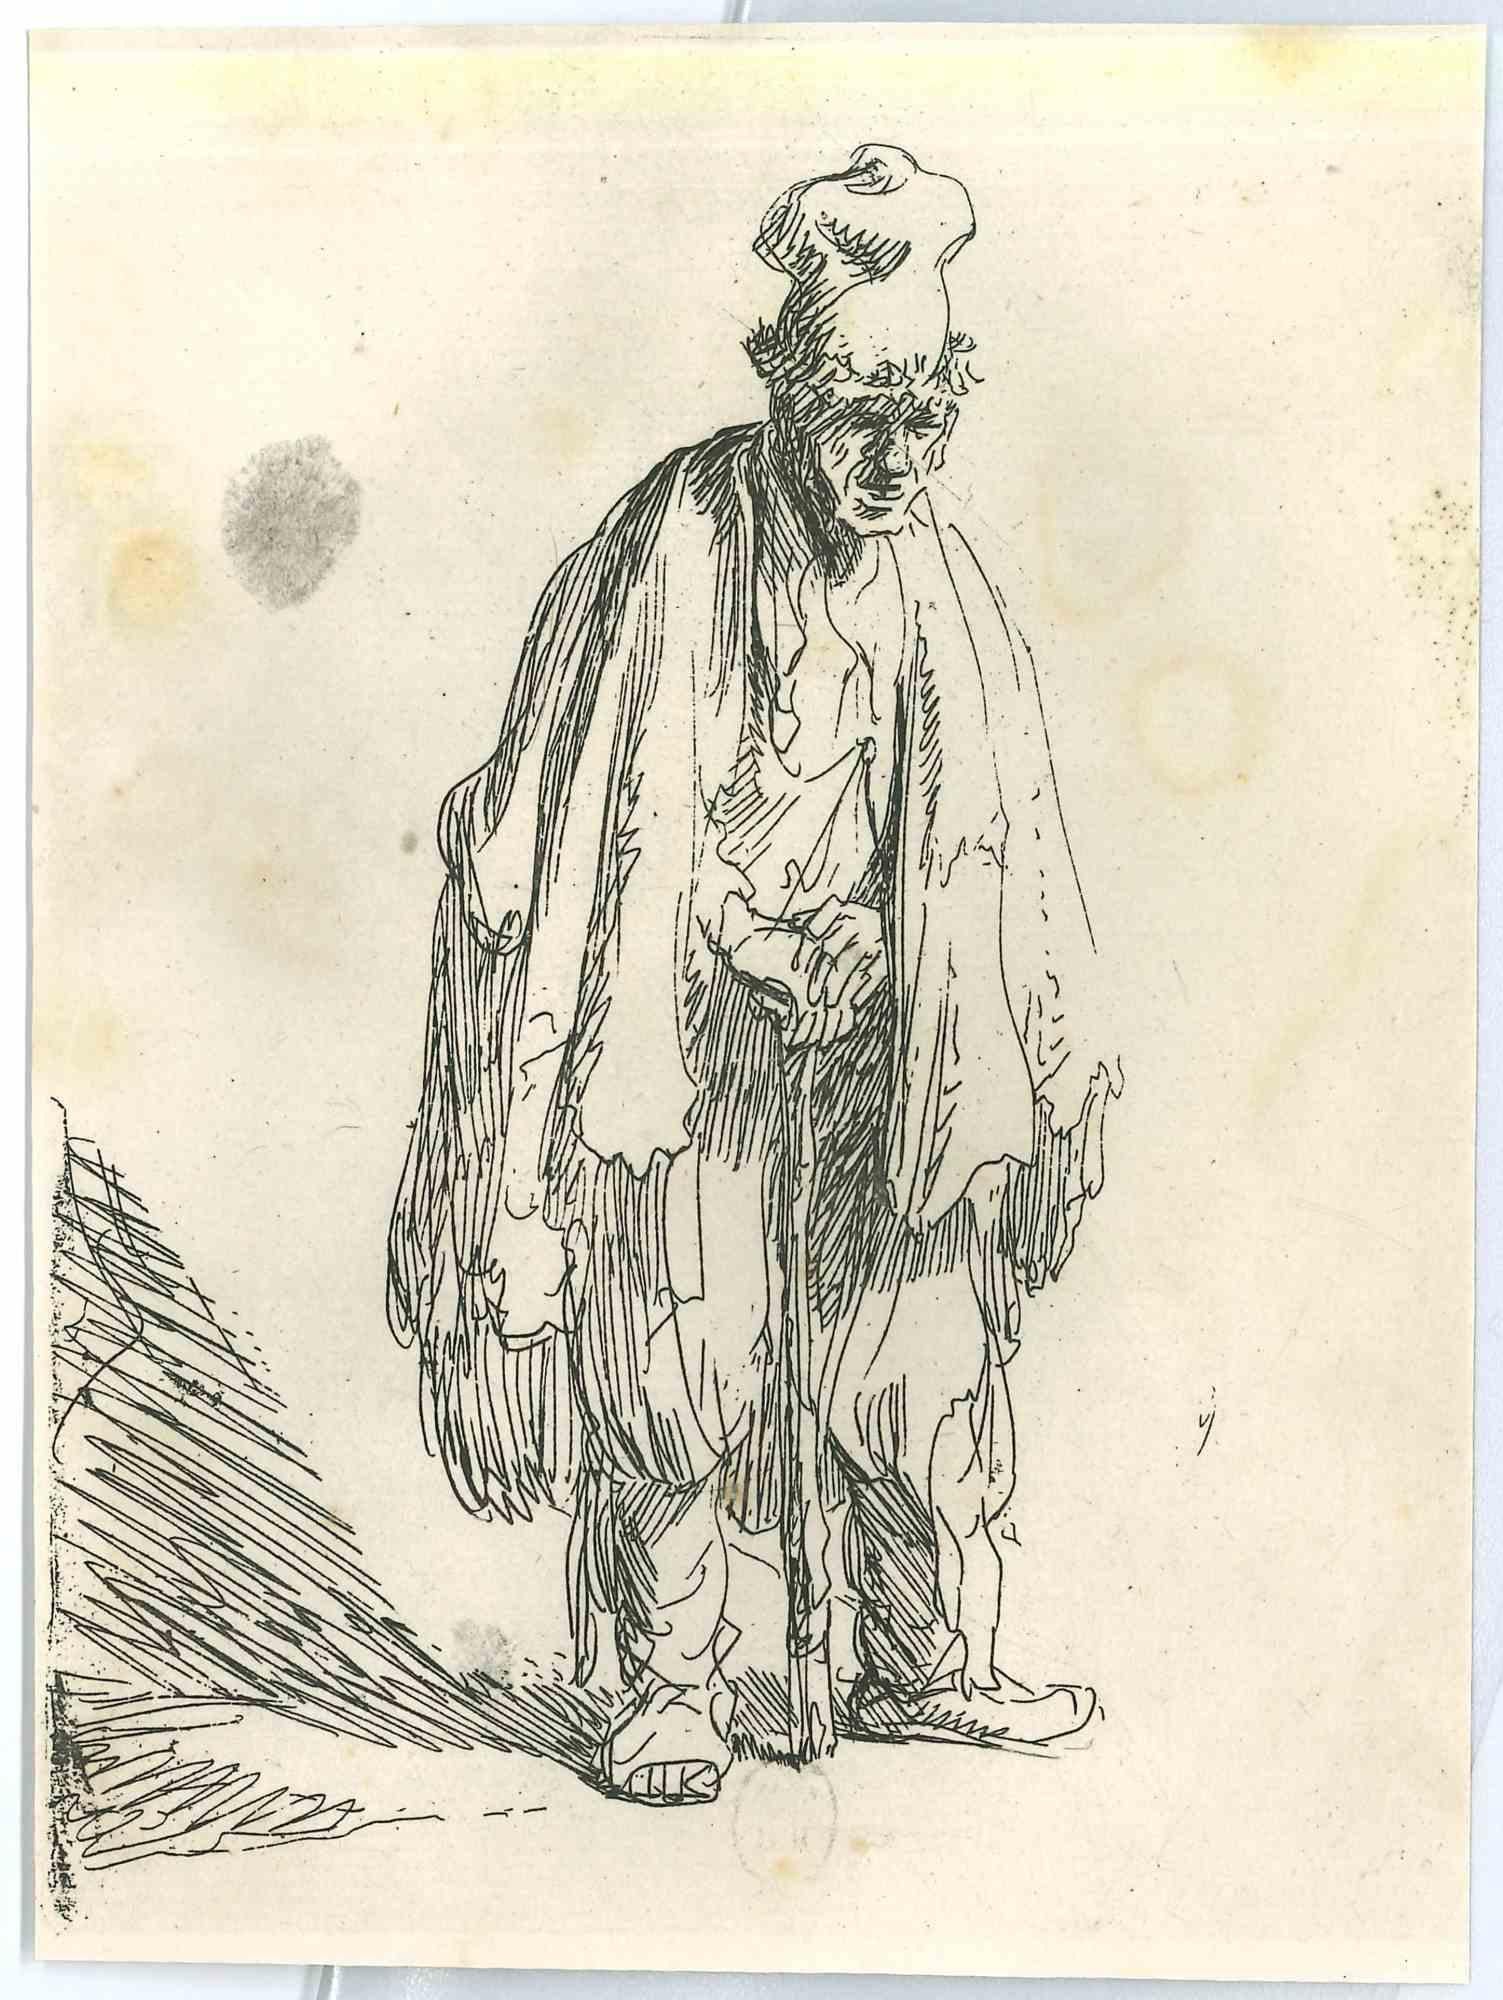 Charles Amand Durand Figurative Print - Beggar in a High Cap - Engraving after Rembrandt - 19th Century